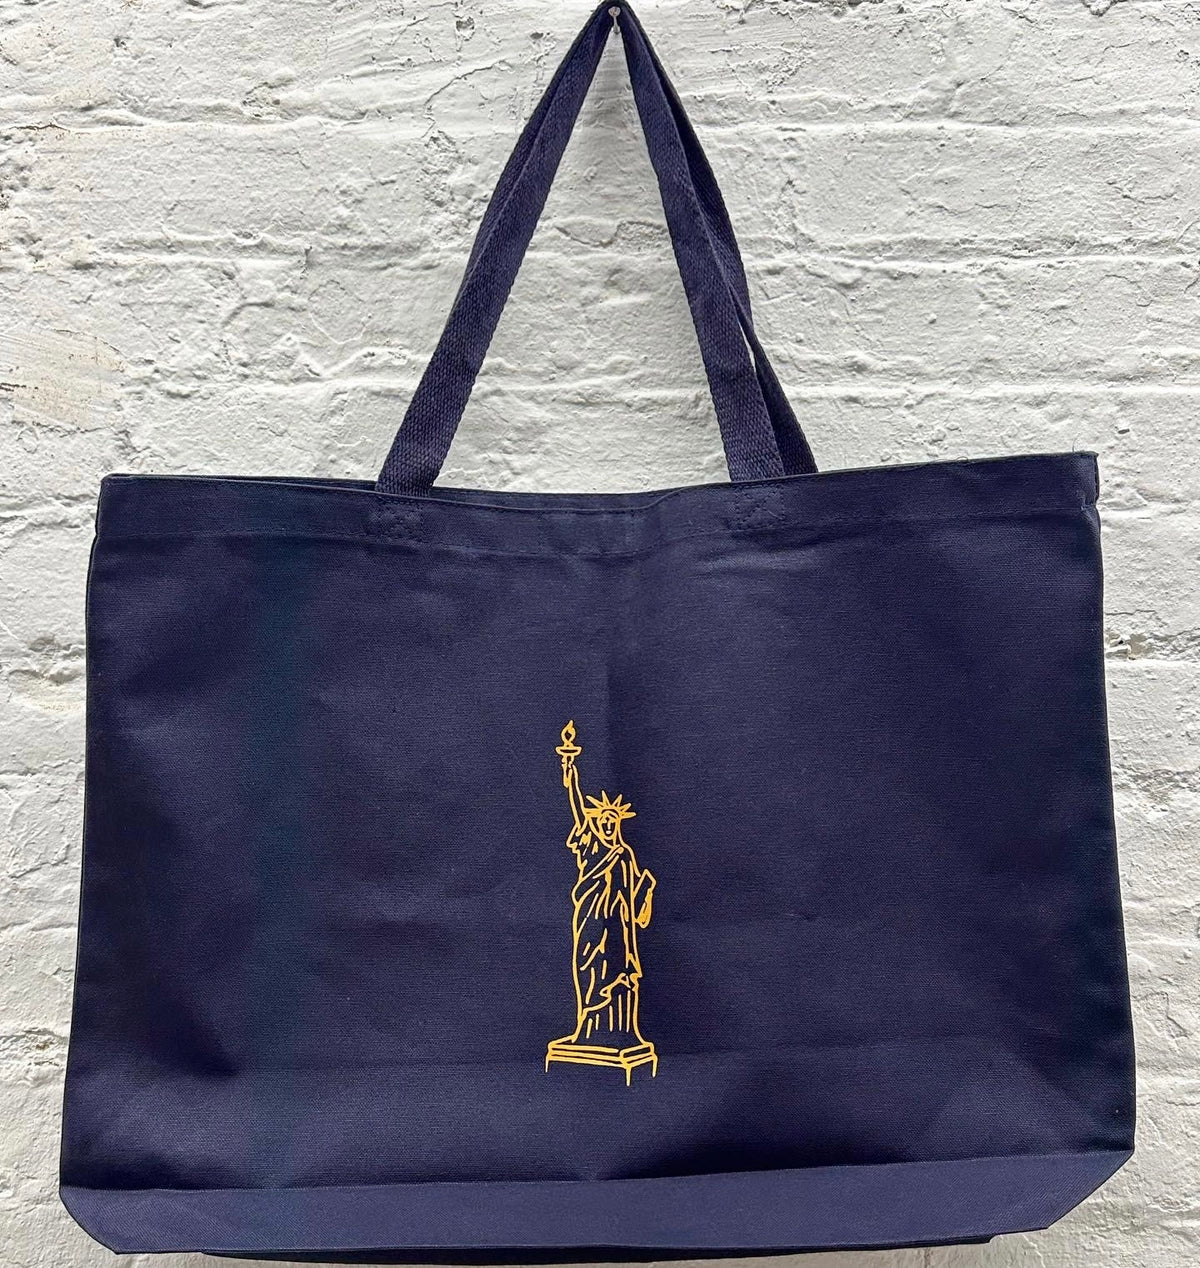 large tote navy